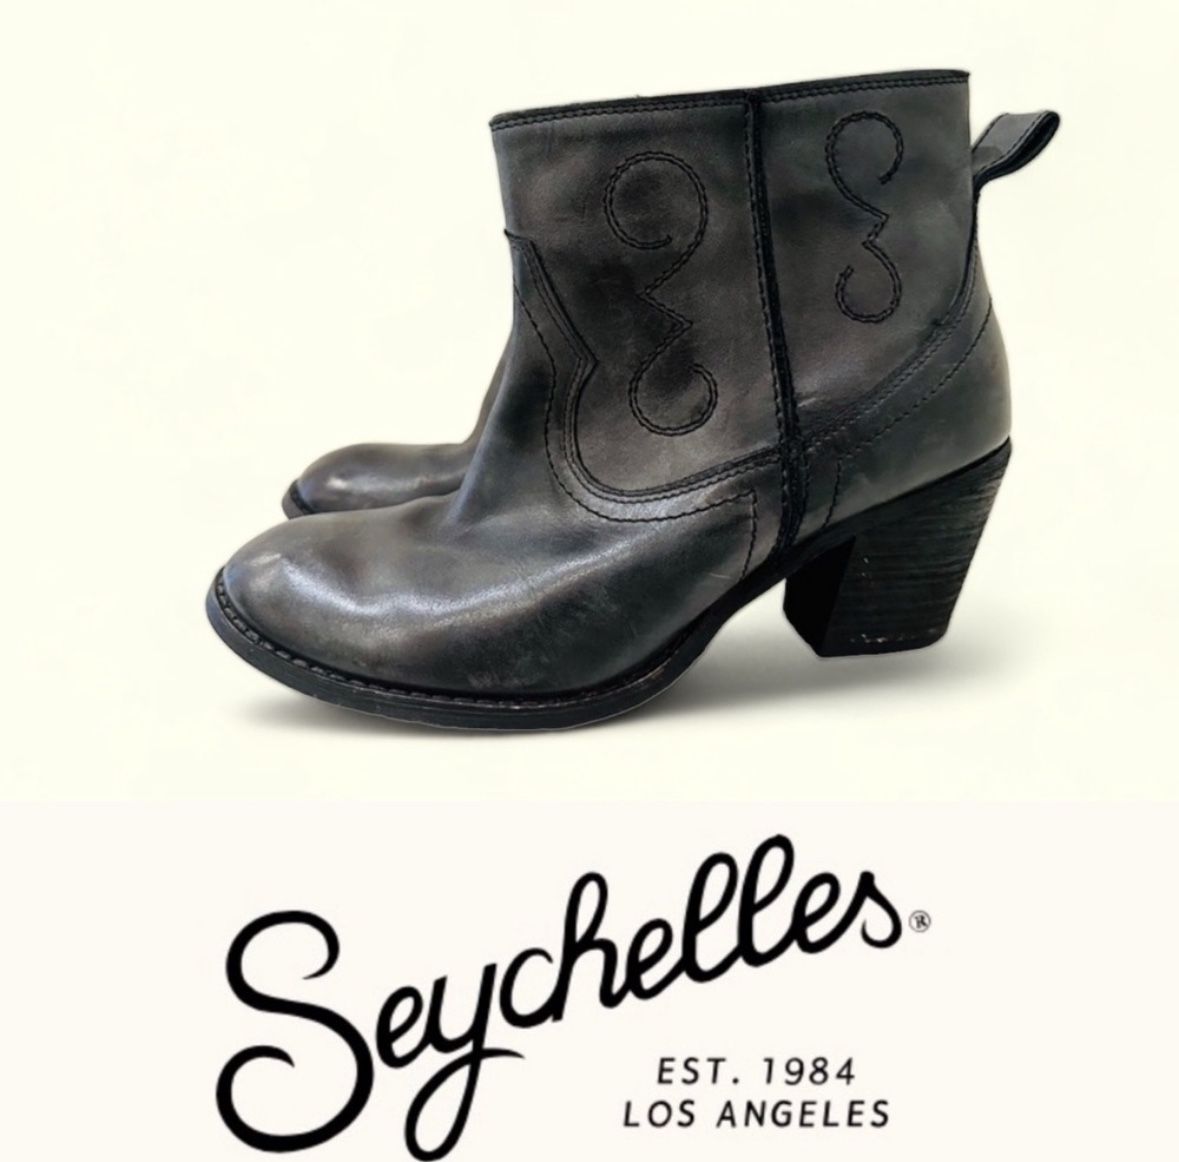 Seychelles Leather Everywhere I go Boots, Size 10, MSRP $160